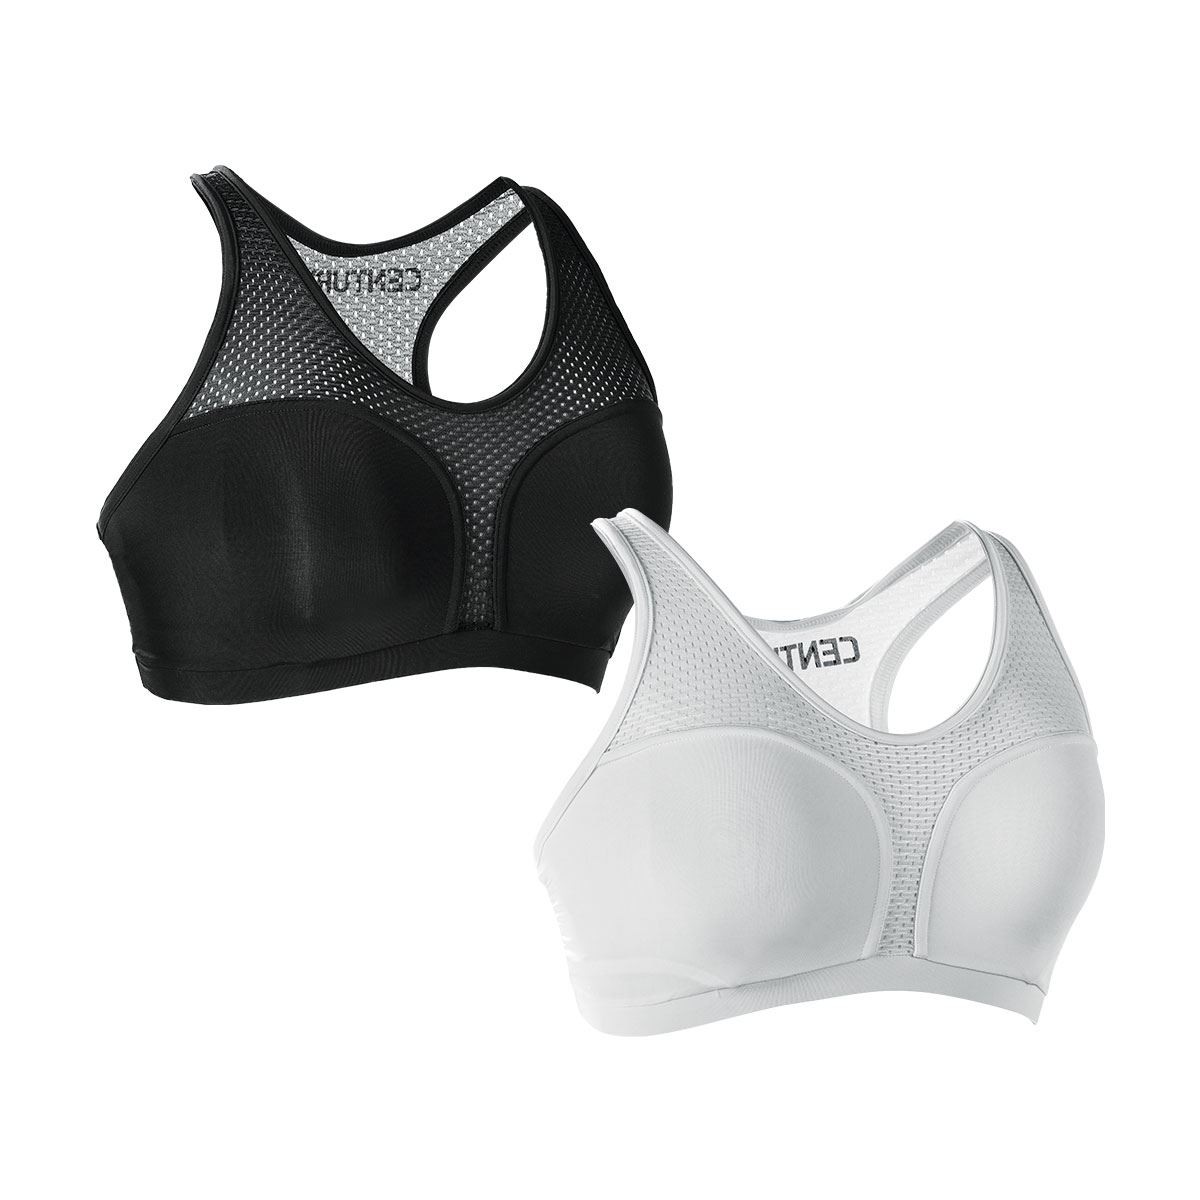 Century Martial Arts Cool Guard Women's Sparring Sports Bra